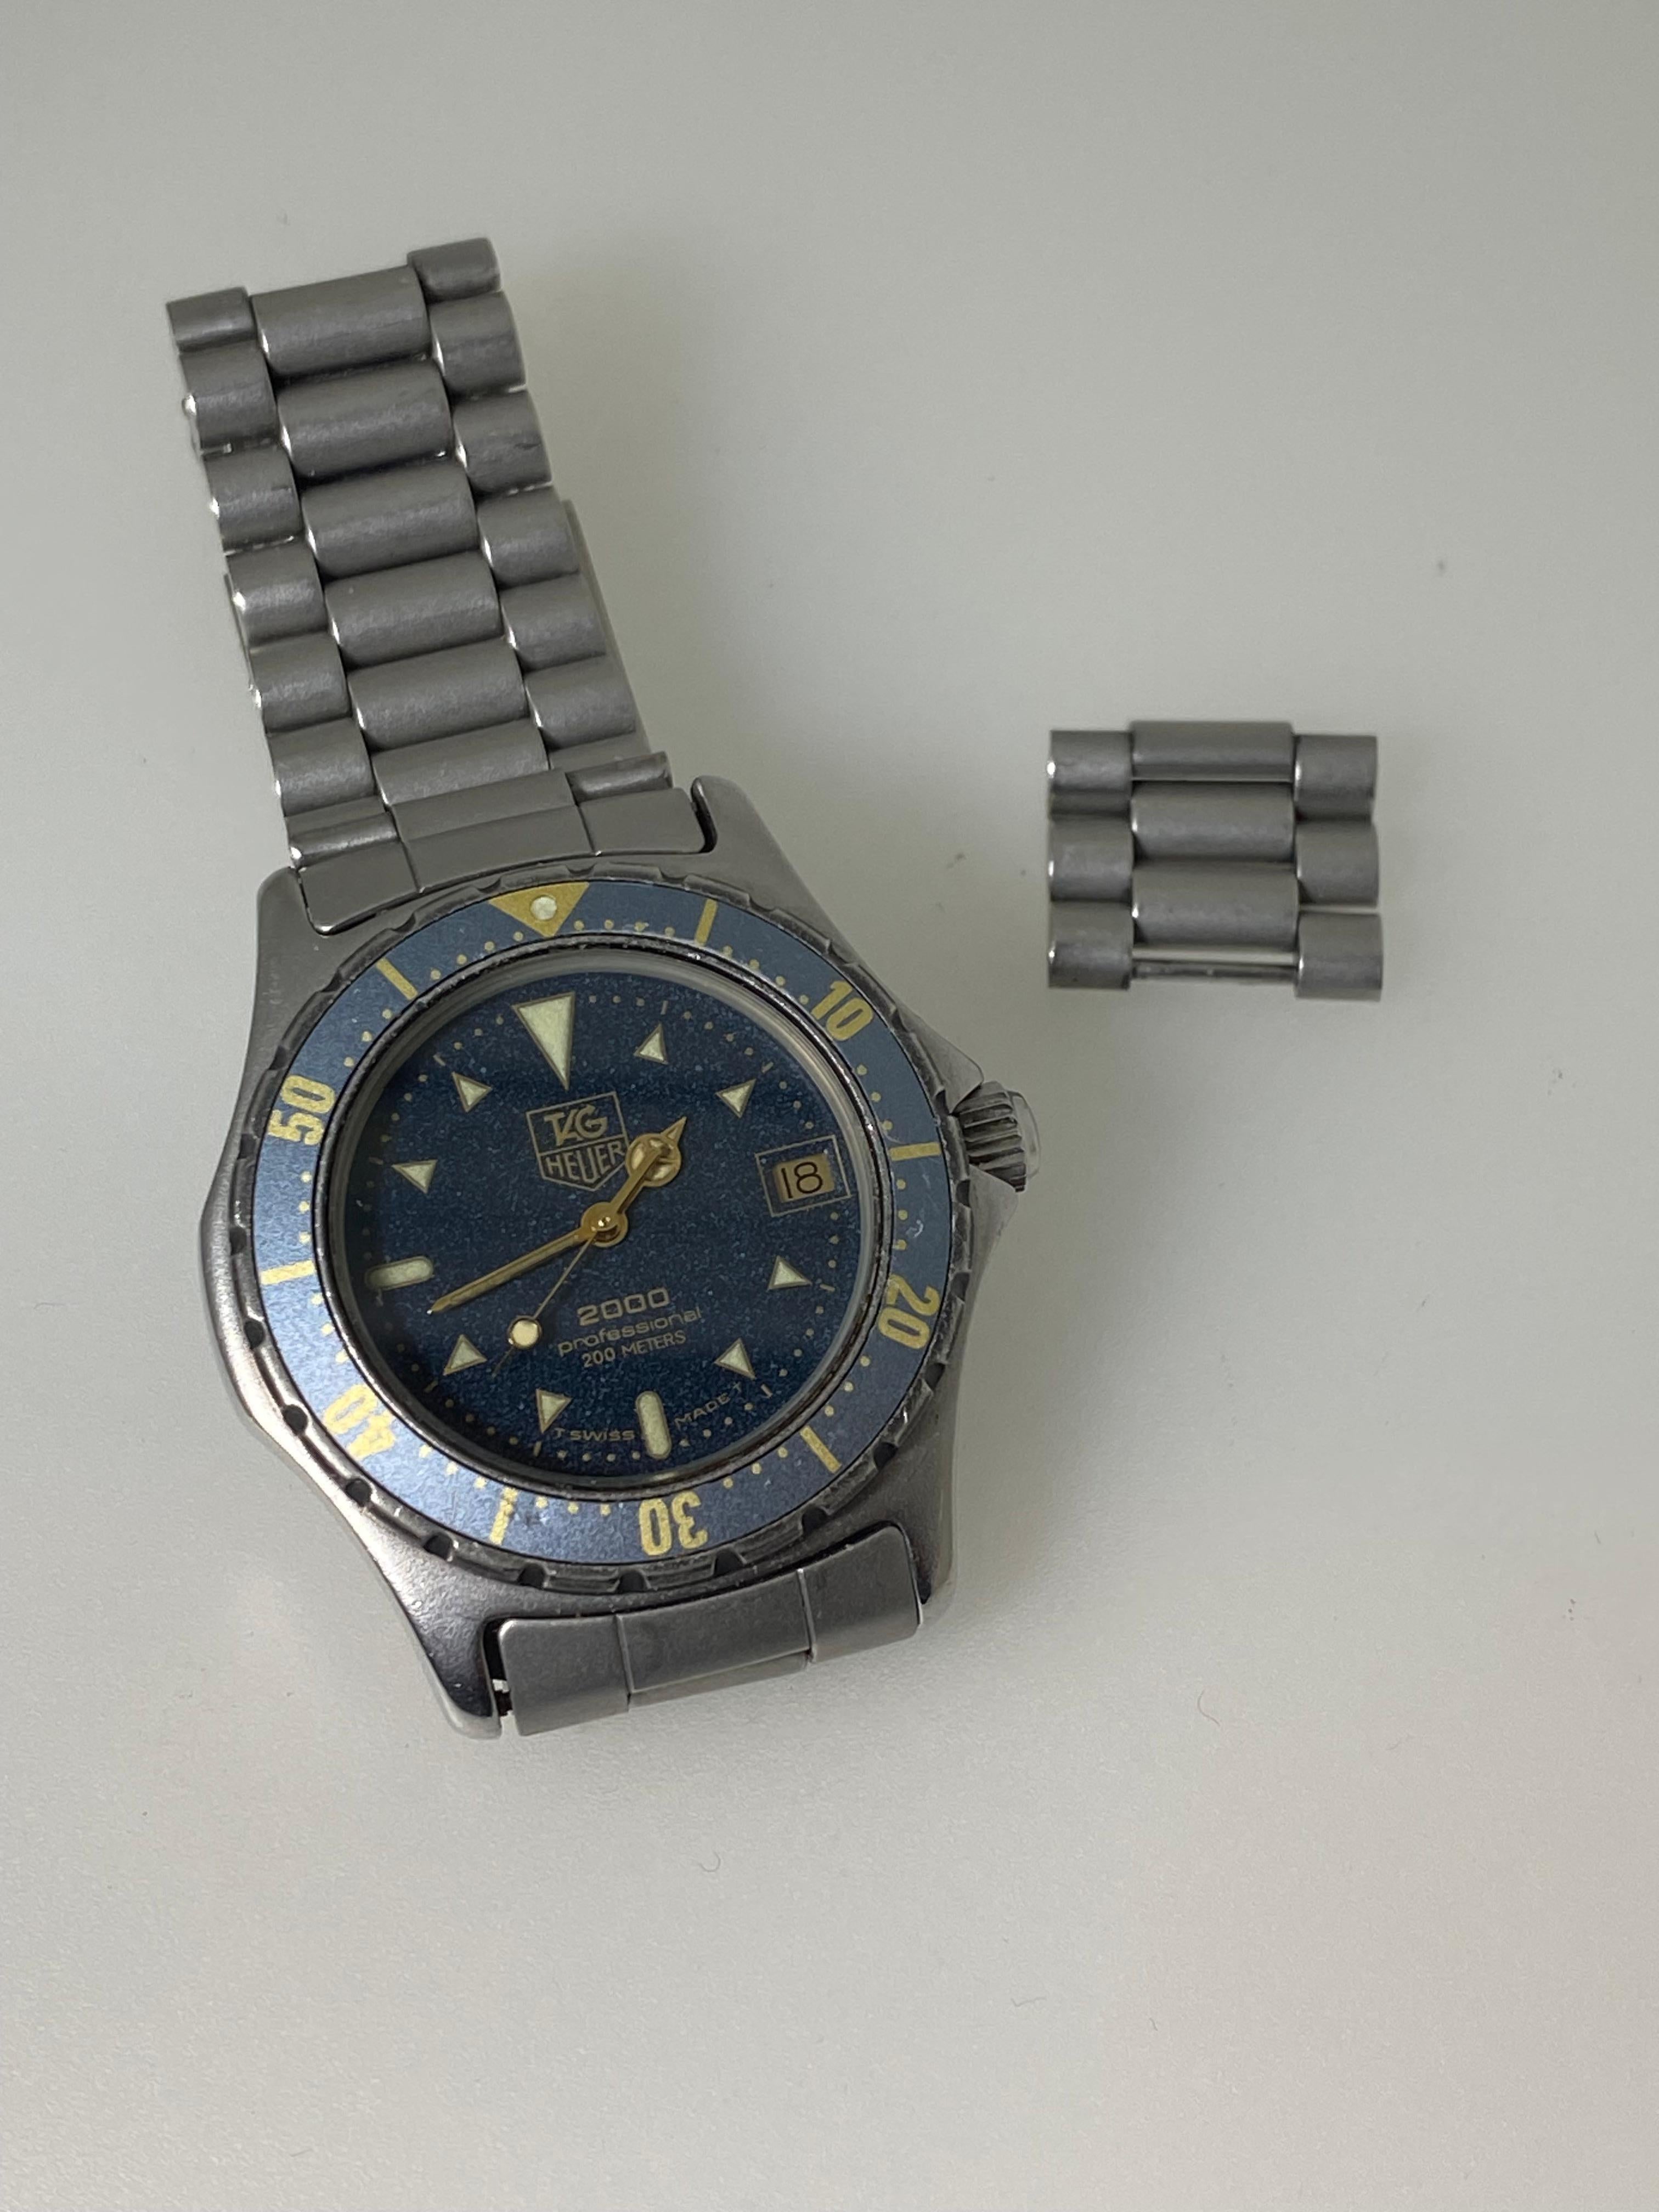 TAG Heuer 2000 Professional 200 Meters 
ref 972 613 Gents' Wristwatch features: 

35mm Stainless Steel Case,
in matte finish  
with screw down back & crown & 
rare Aluminium blue coloured Rotating Bezel 
with golden highlights 
The case is signed &